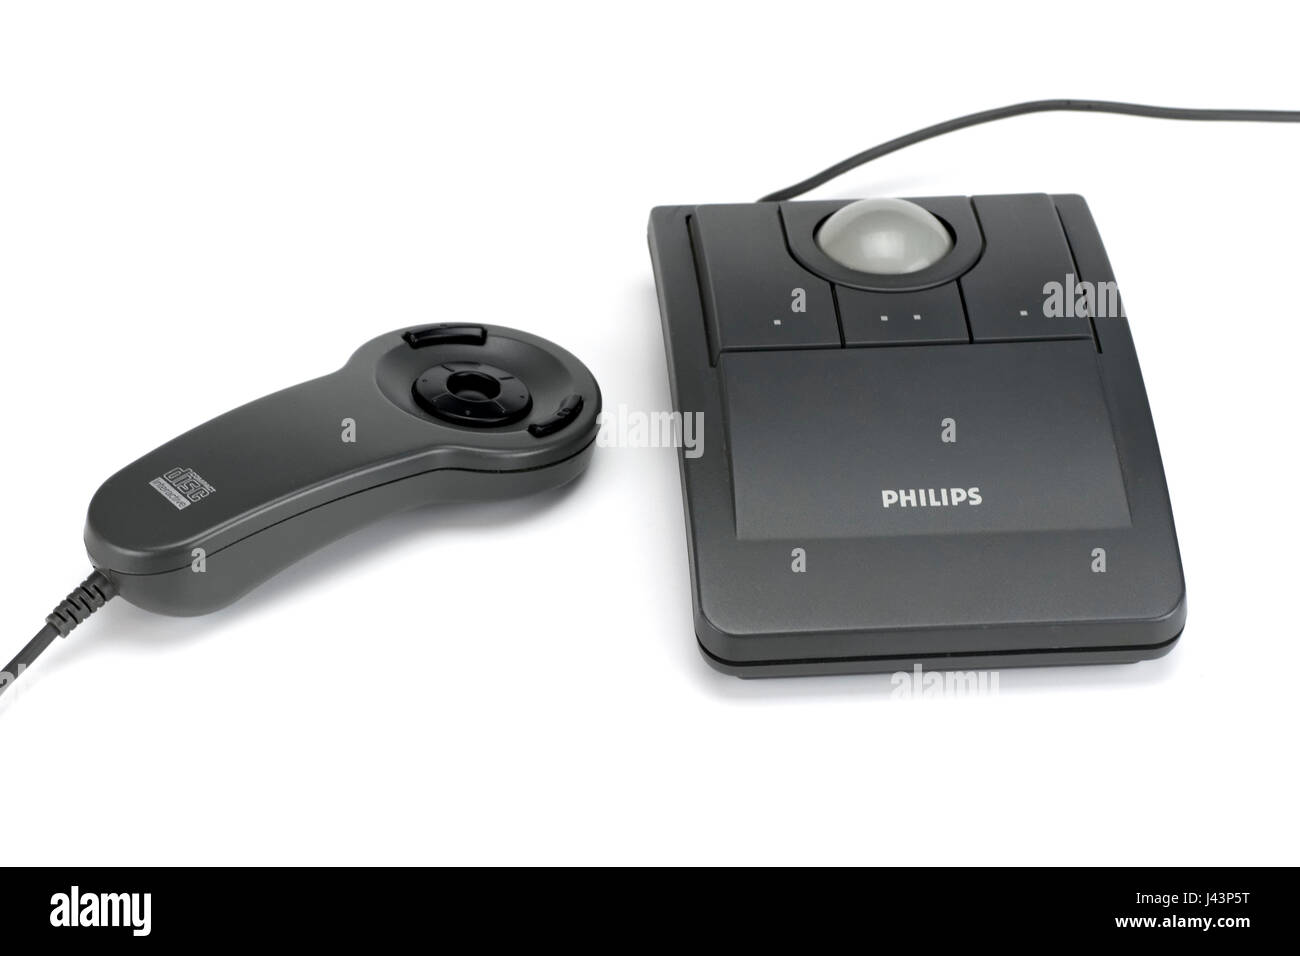 Product Picture From A Philips Cdi 450 Stock Photo 140224836 Alamy